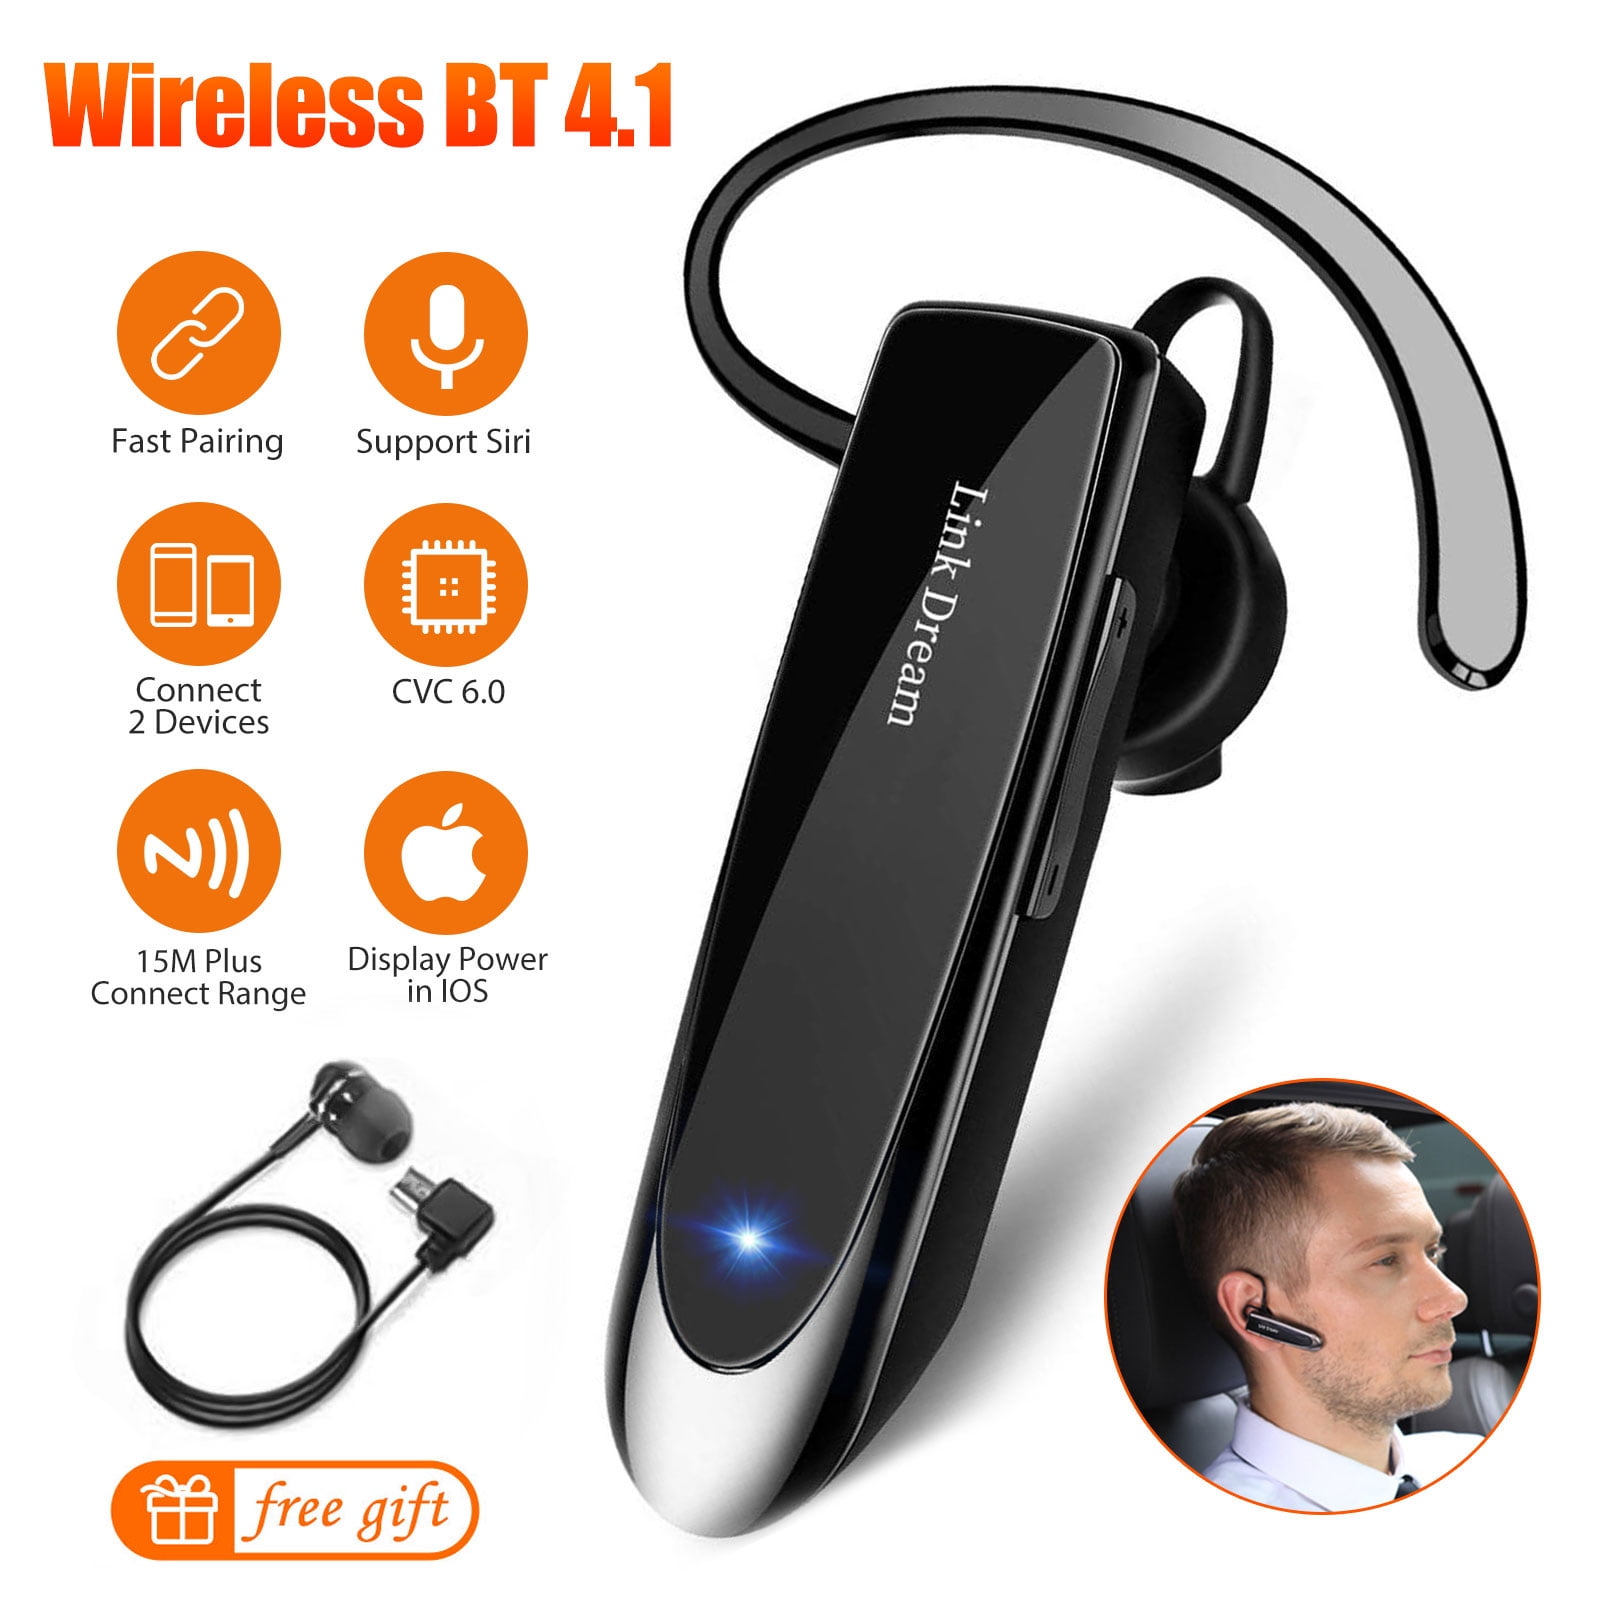 EEEKit Bluetooth Headset 24Hrs Playtime Wireless Bluetooth V4.1 Earpiece CVC 6.0 Noise Canceling Headphone Car Trucker Business Earbud with Mic Compatible with iPhone Samsung Android (Black)